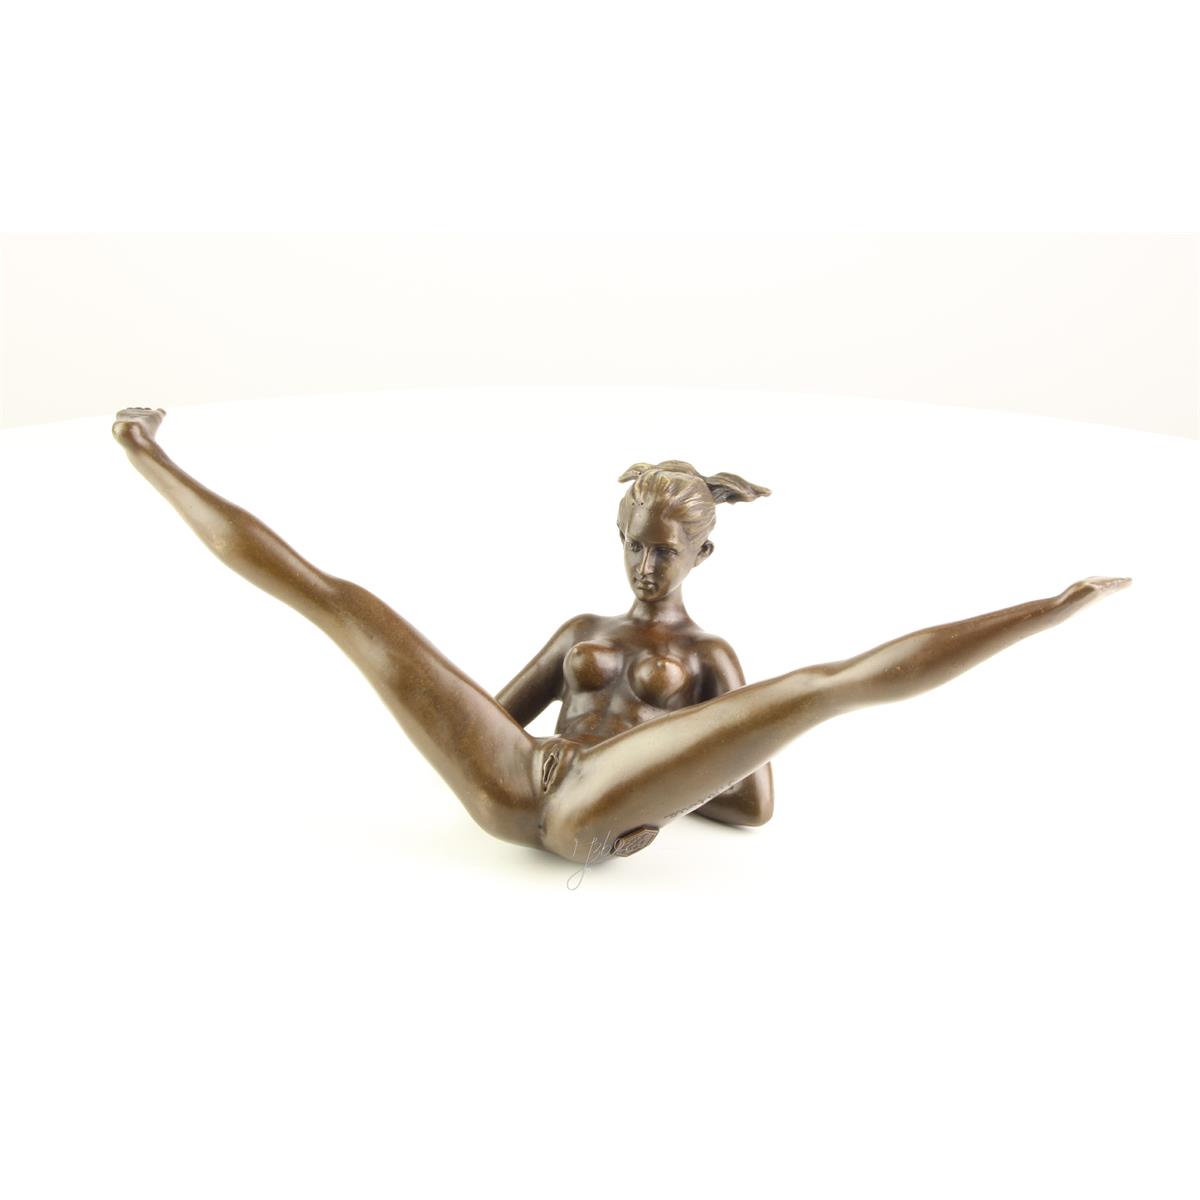 AN EROTIC BRONZE SCULPTURE OF A FEMALE NUDE